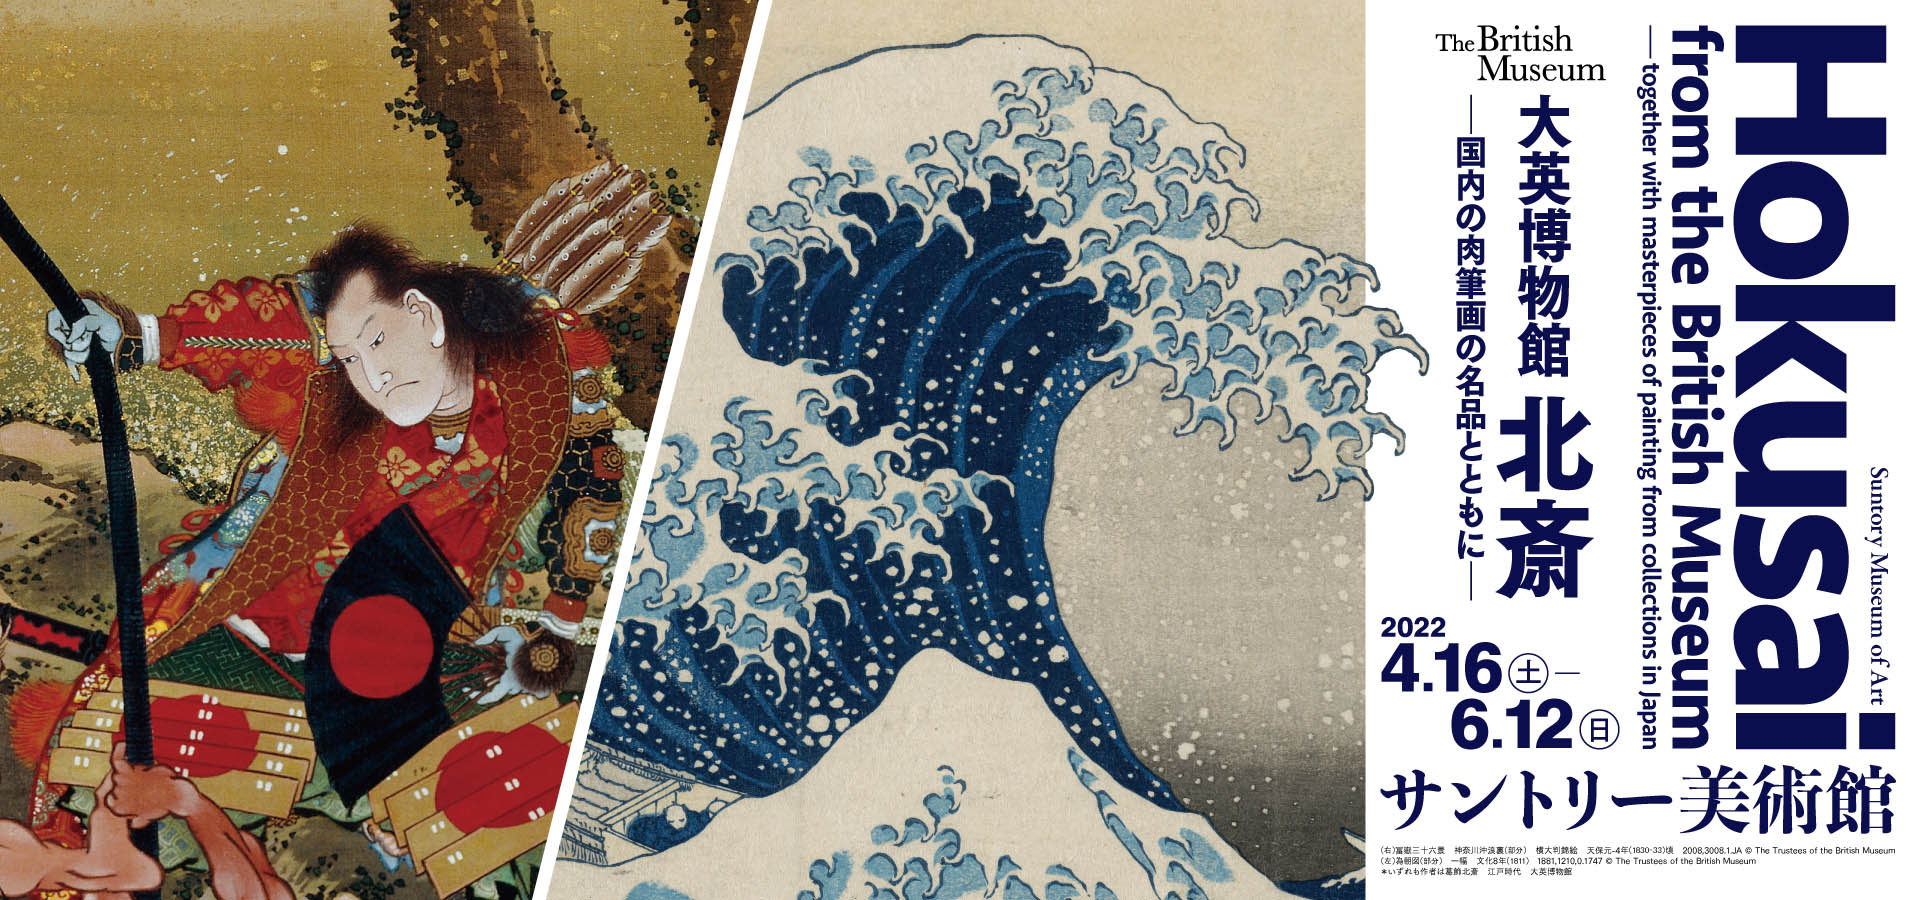 Hokusai from the British Museum ―together with masterpieces of painting  from collections in Japan, Exhibitions